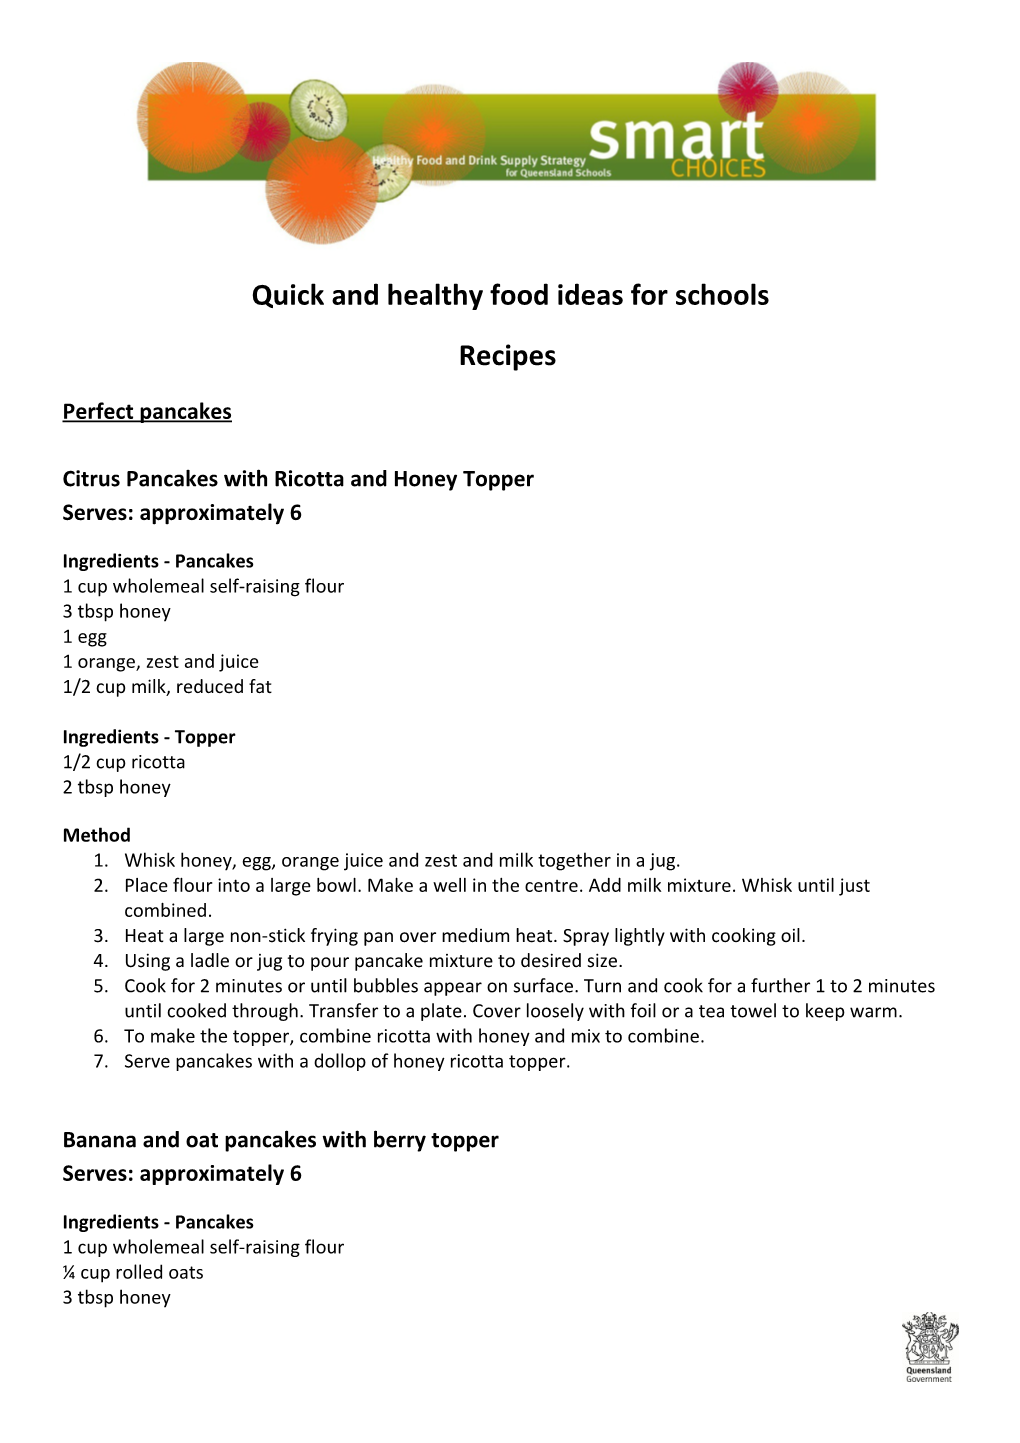 Quick and Healthy Food Ideas for Schools